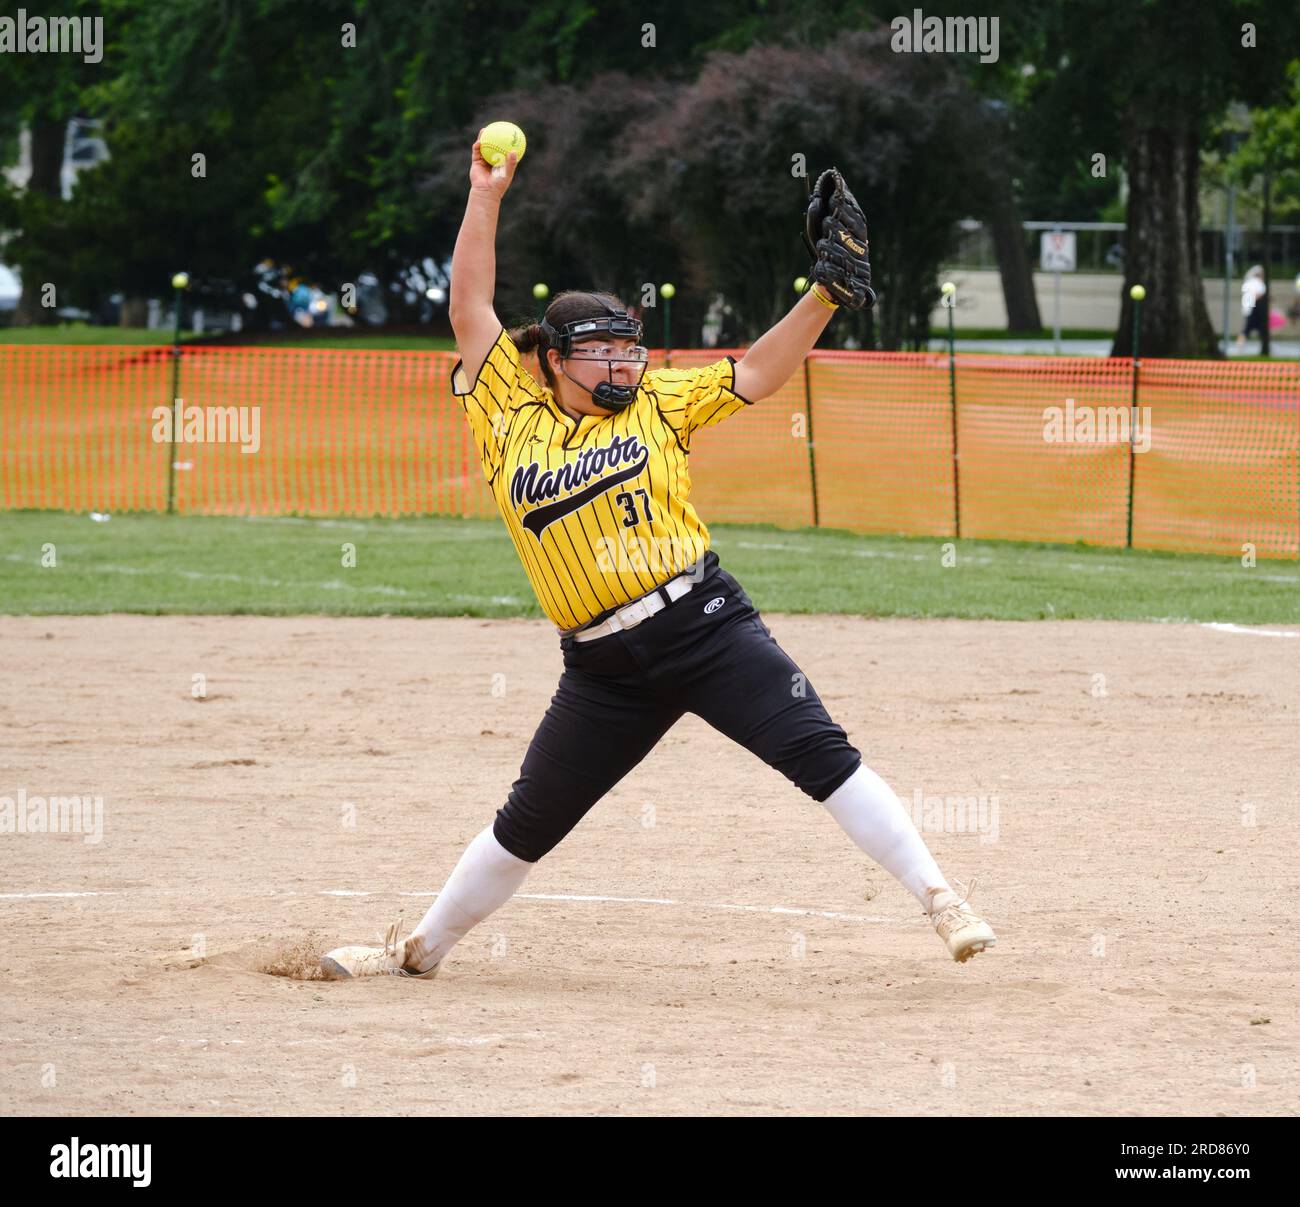 NAIG 2023 Softball tournament- u19 Female Manitoba Pitcher in the windup of her pitch delivery. Halifax July 2023 Stock Photo